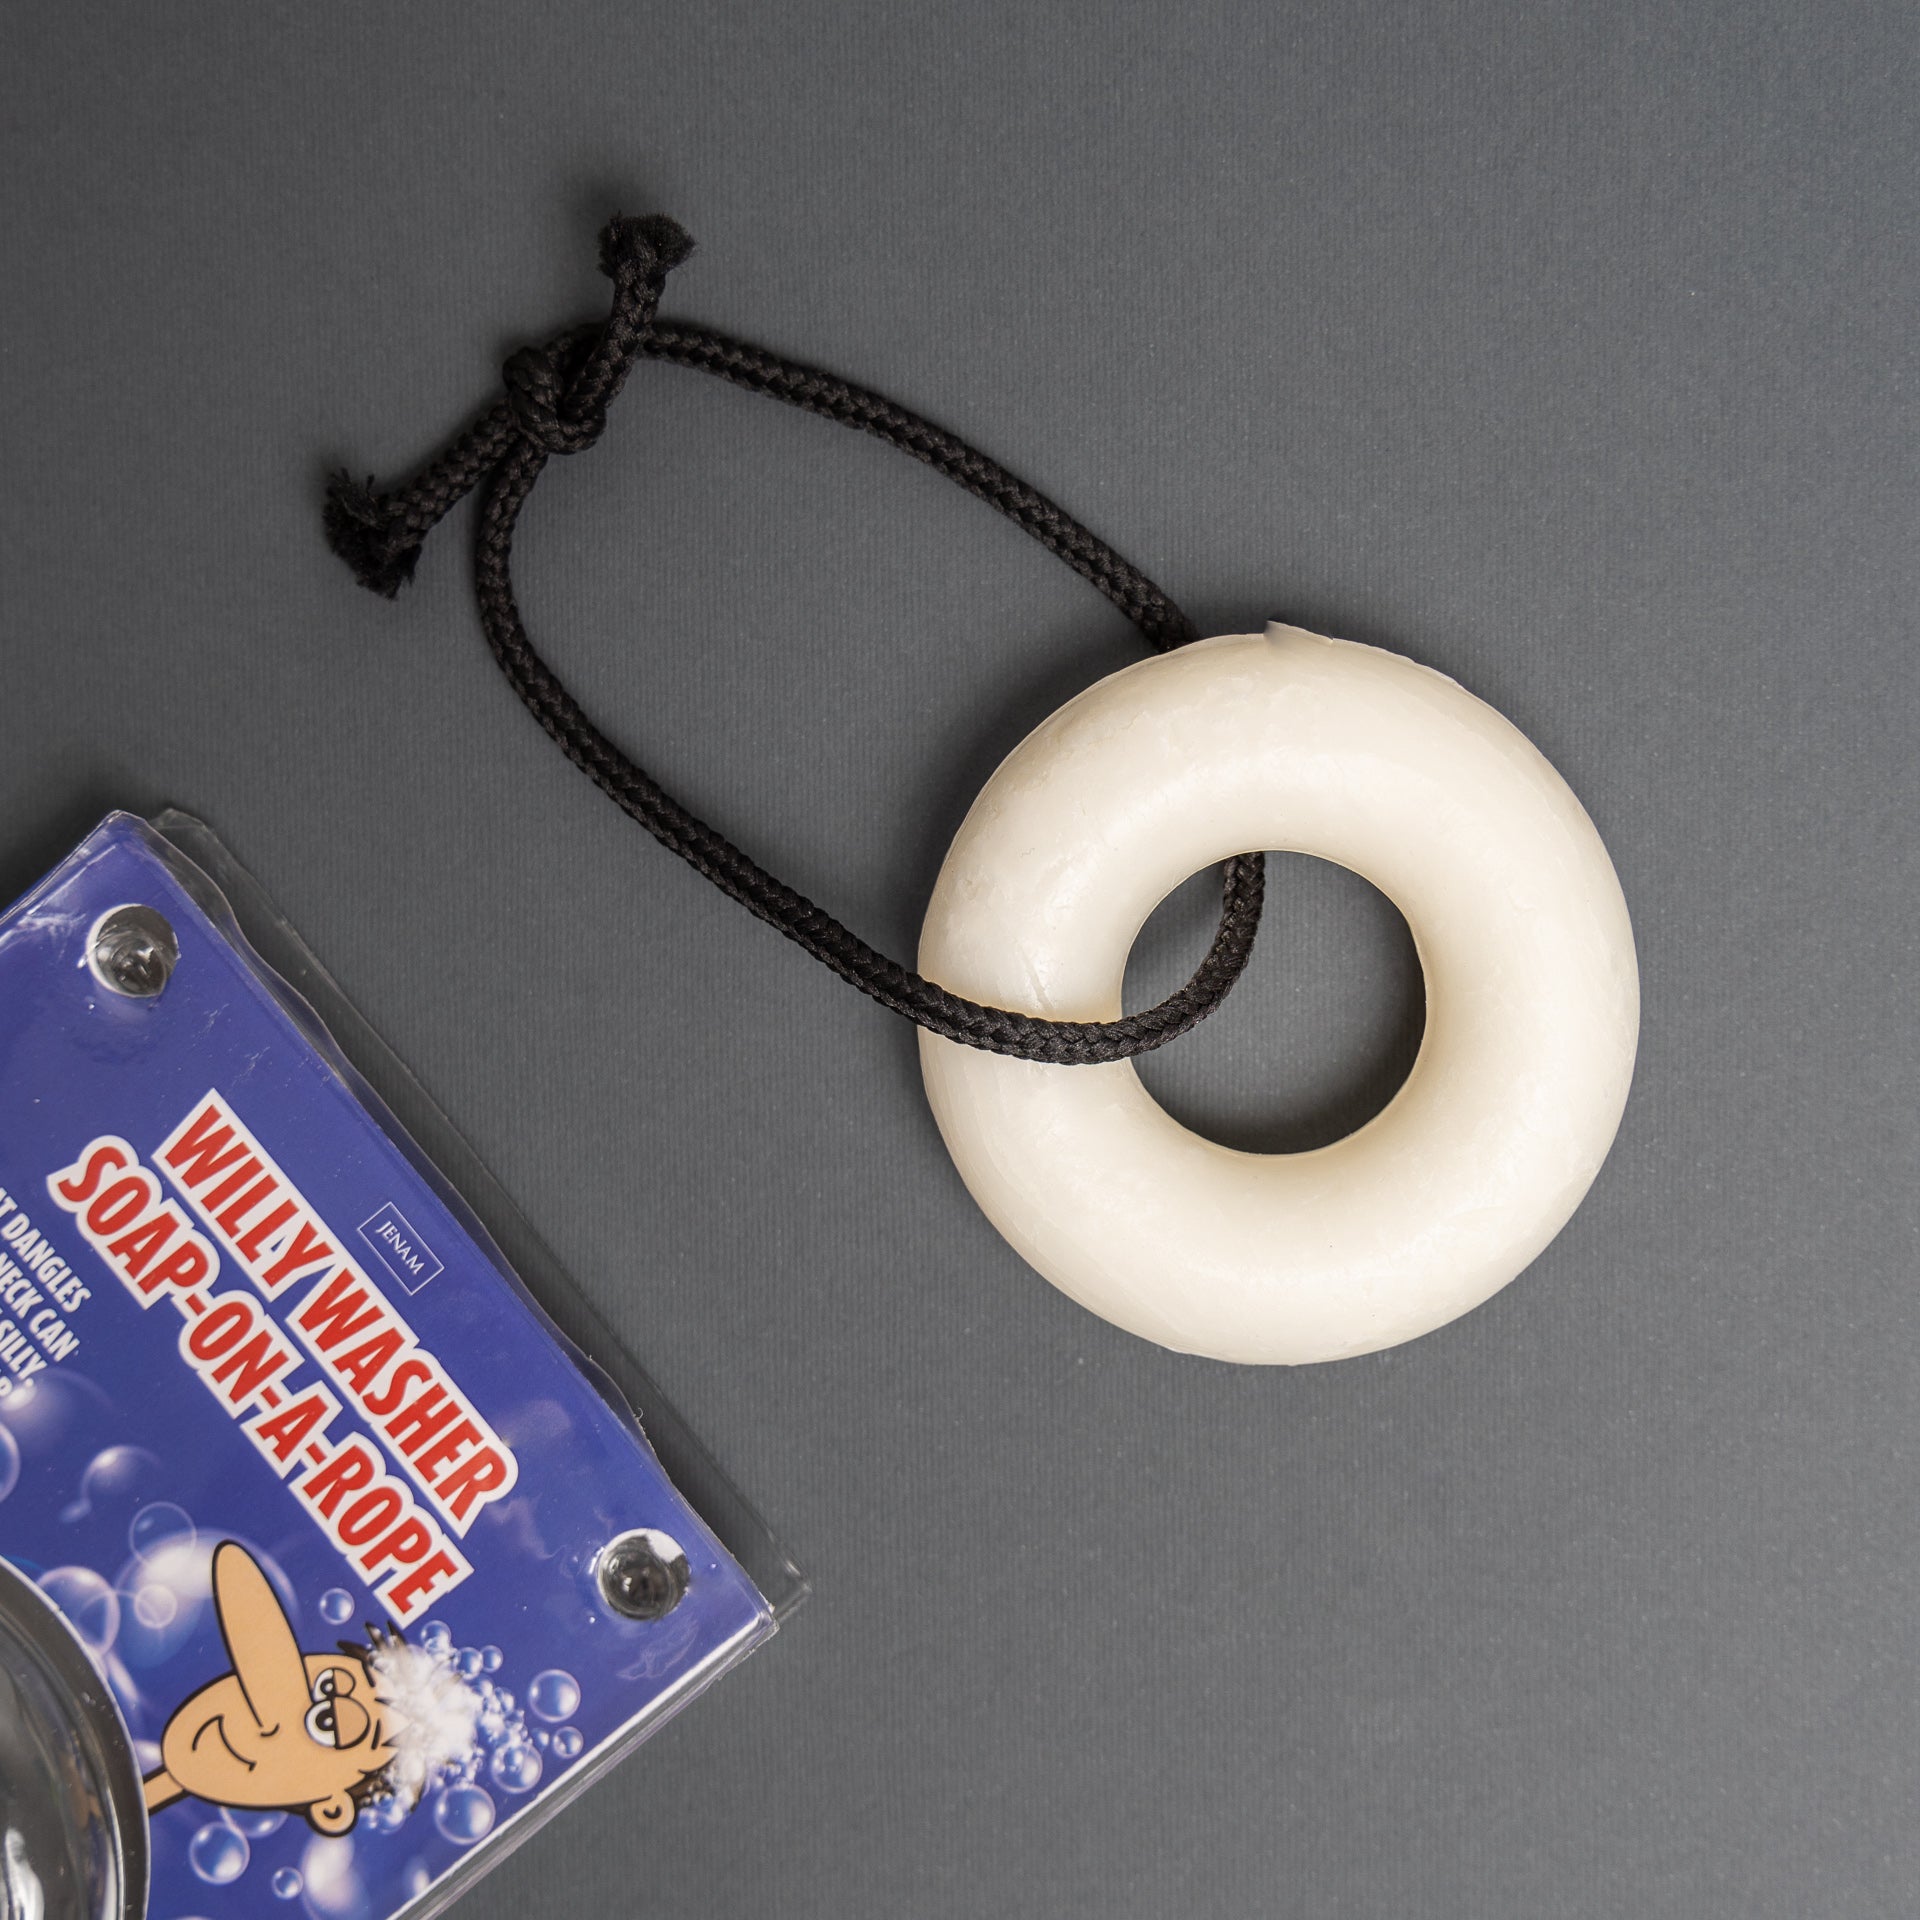 “Willy Washer” Soap-on-a-Rope